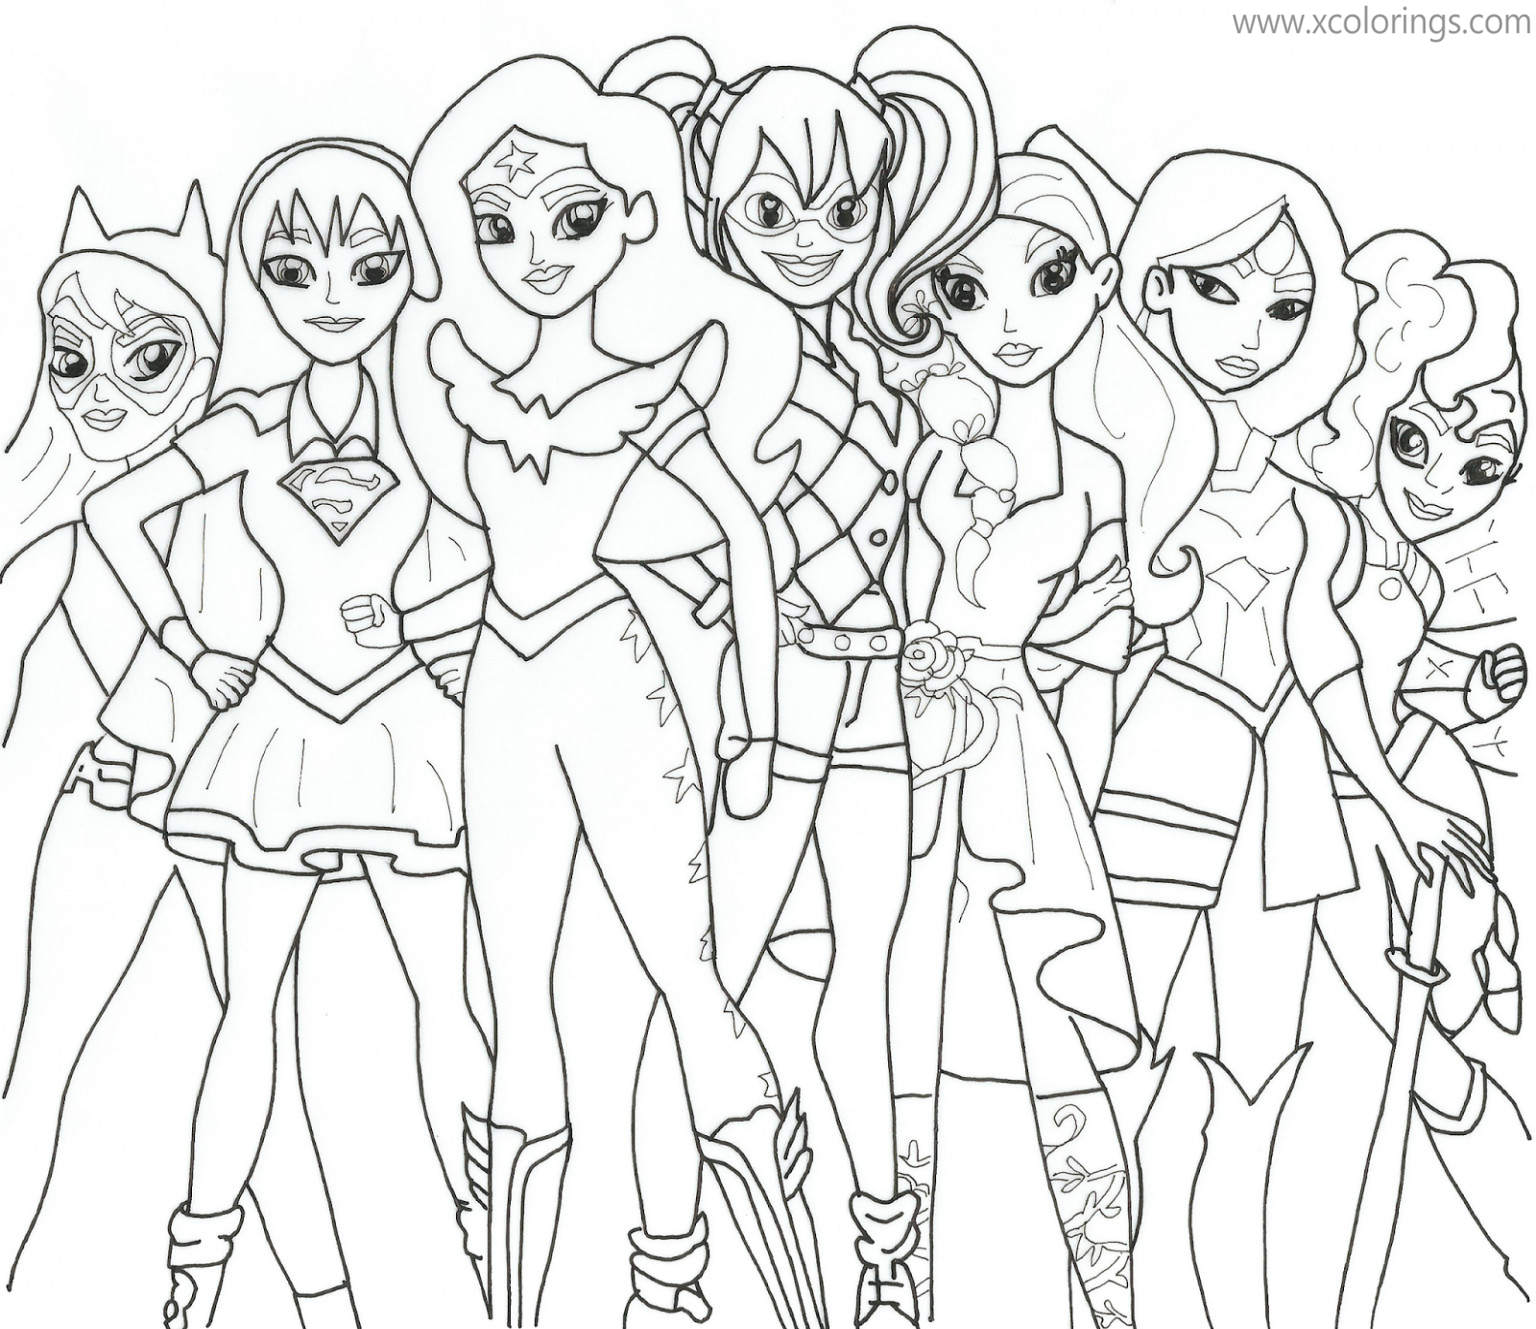 Free Wonder Woman and Super Hero Girls Coloring Pages printable